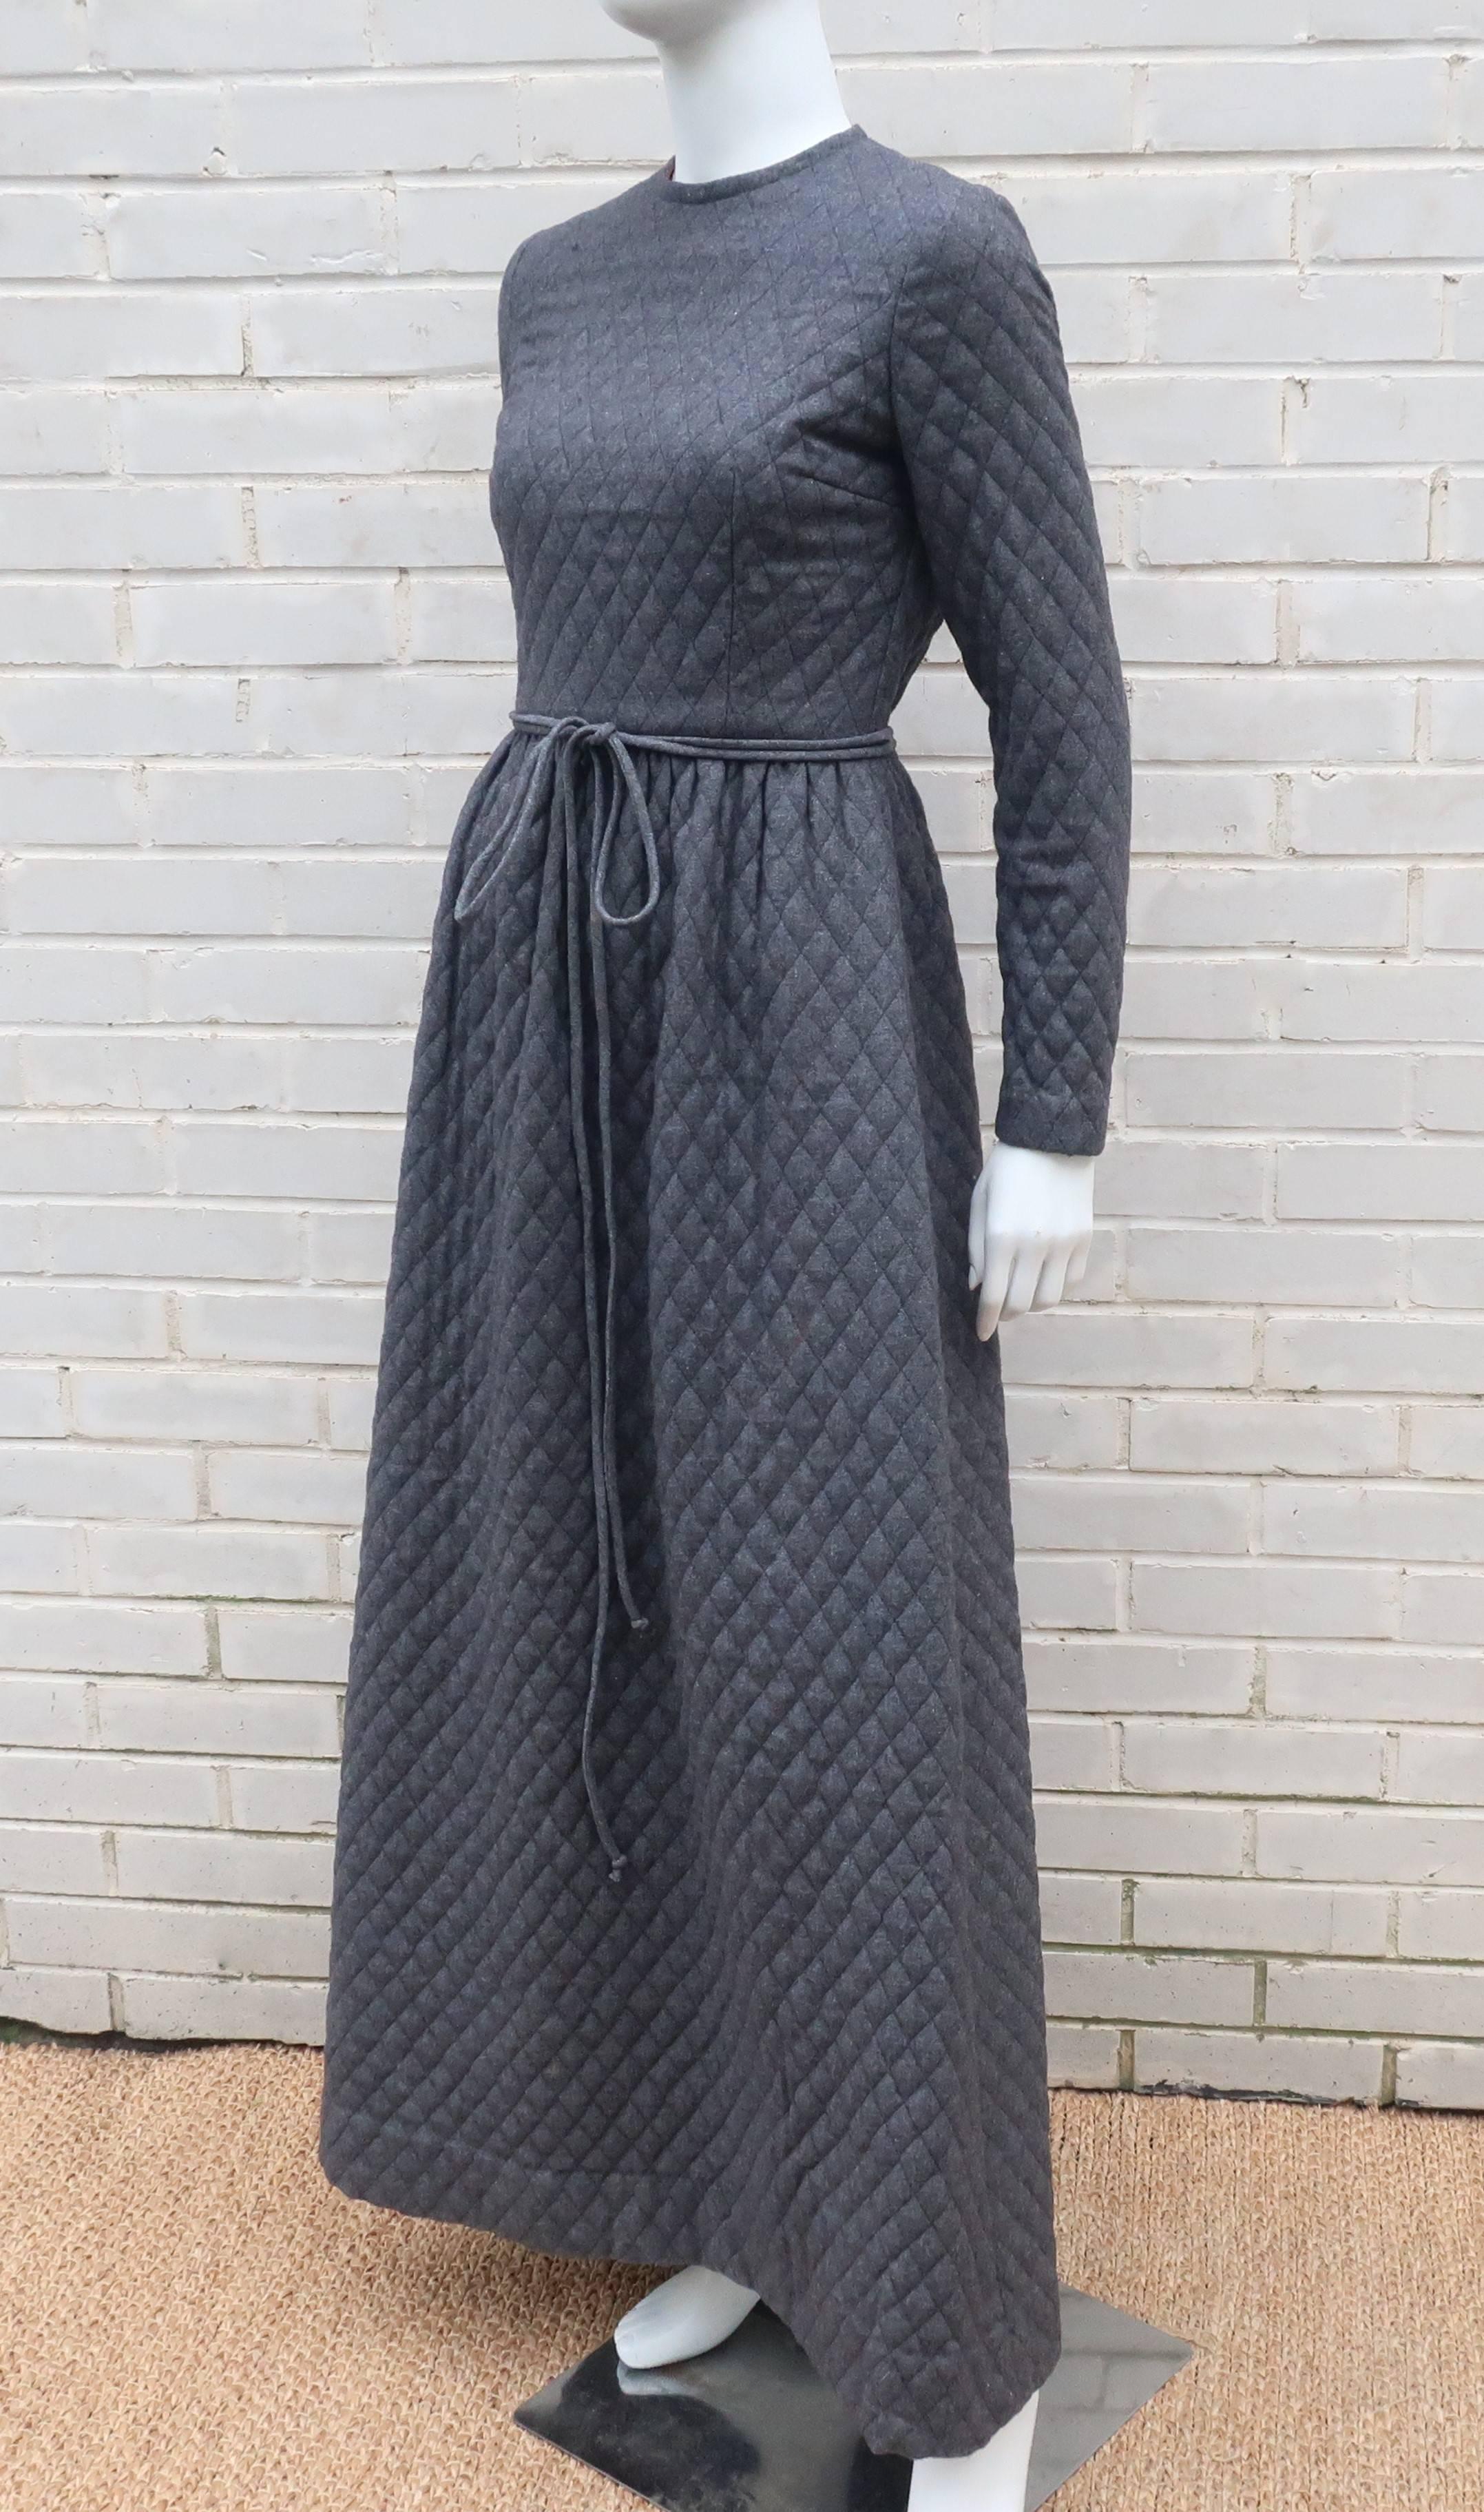 This C.1970 dress by Anne Fogarty conjures up images of Jane Eyre and other heroines of gothic literature.  The austere silhouette is formed with charcoal gray quilted wool fabric in a strict bodice with long sleeves, cinched waist, hidden side